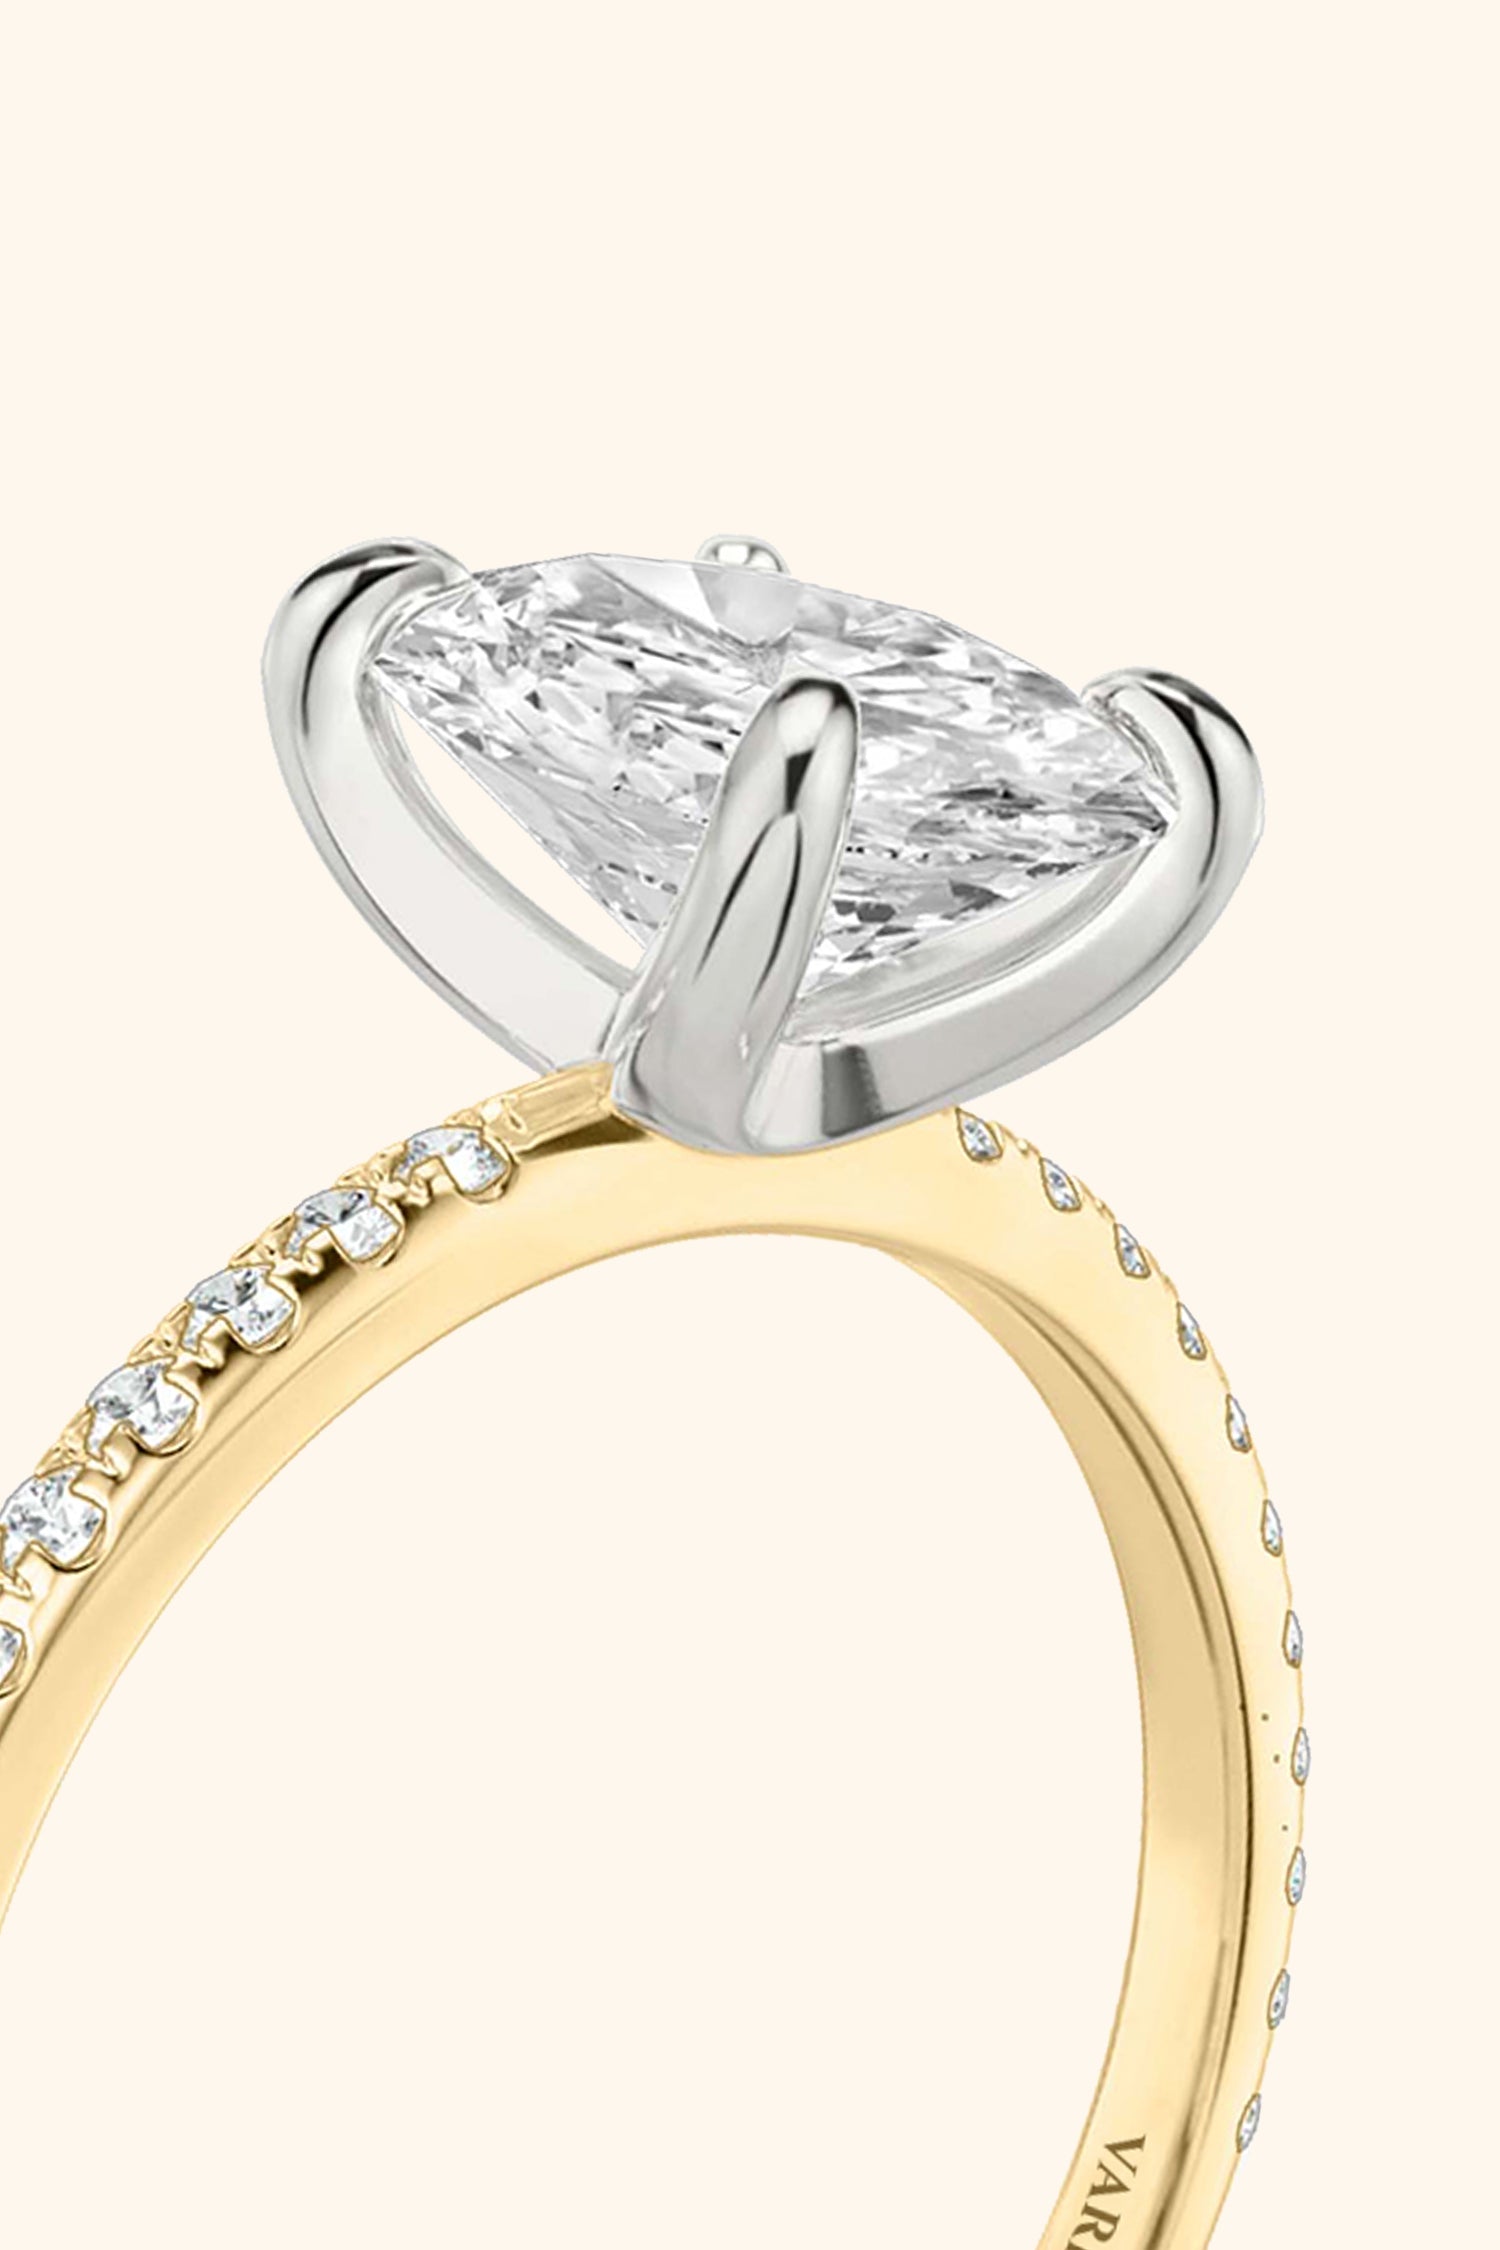 Dual Tone Glance Pavé Ring with 3 Carat Oval Solitaire